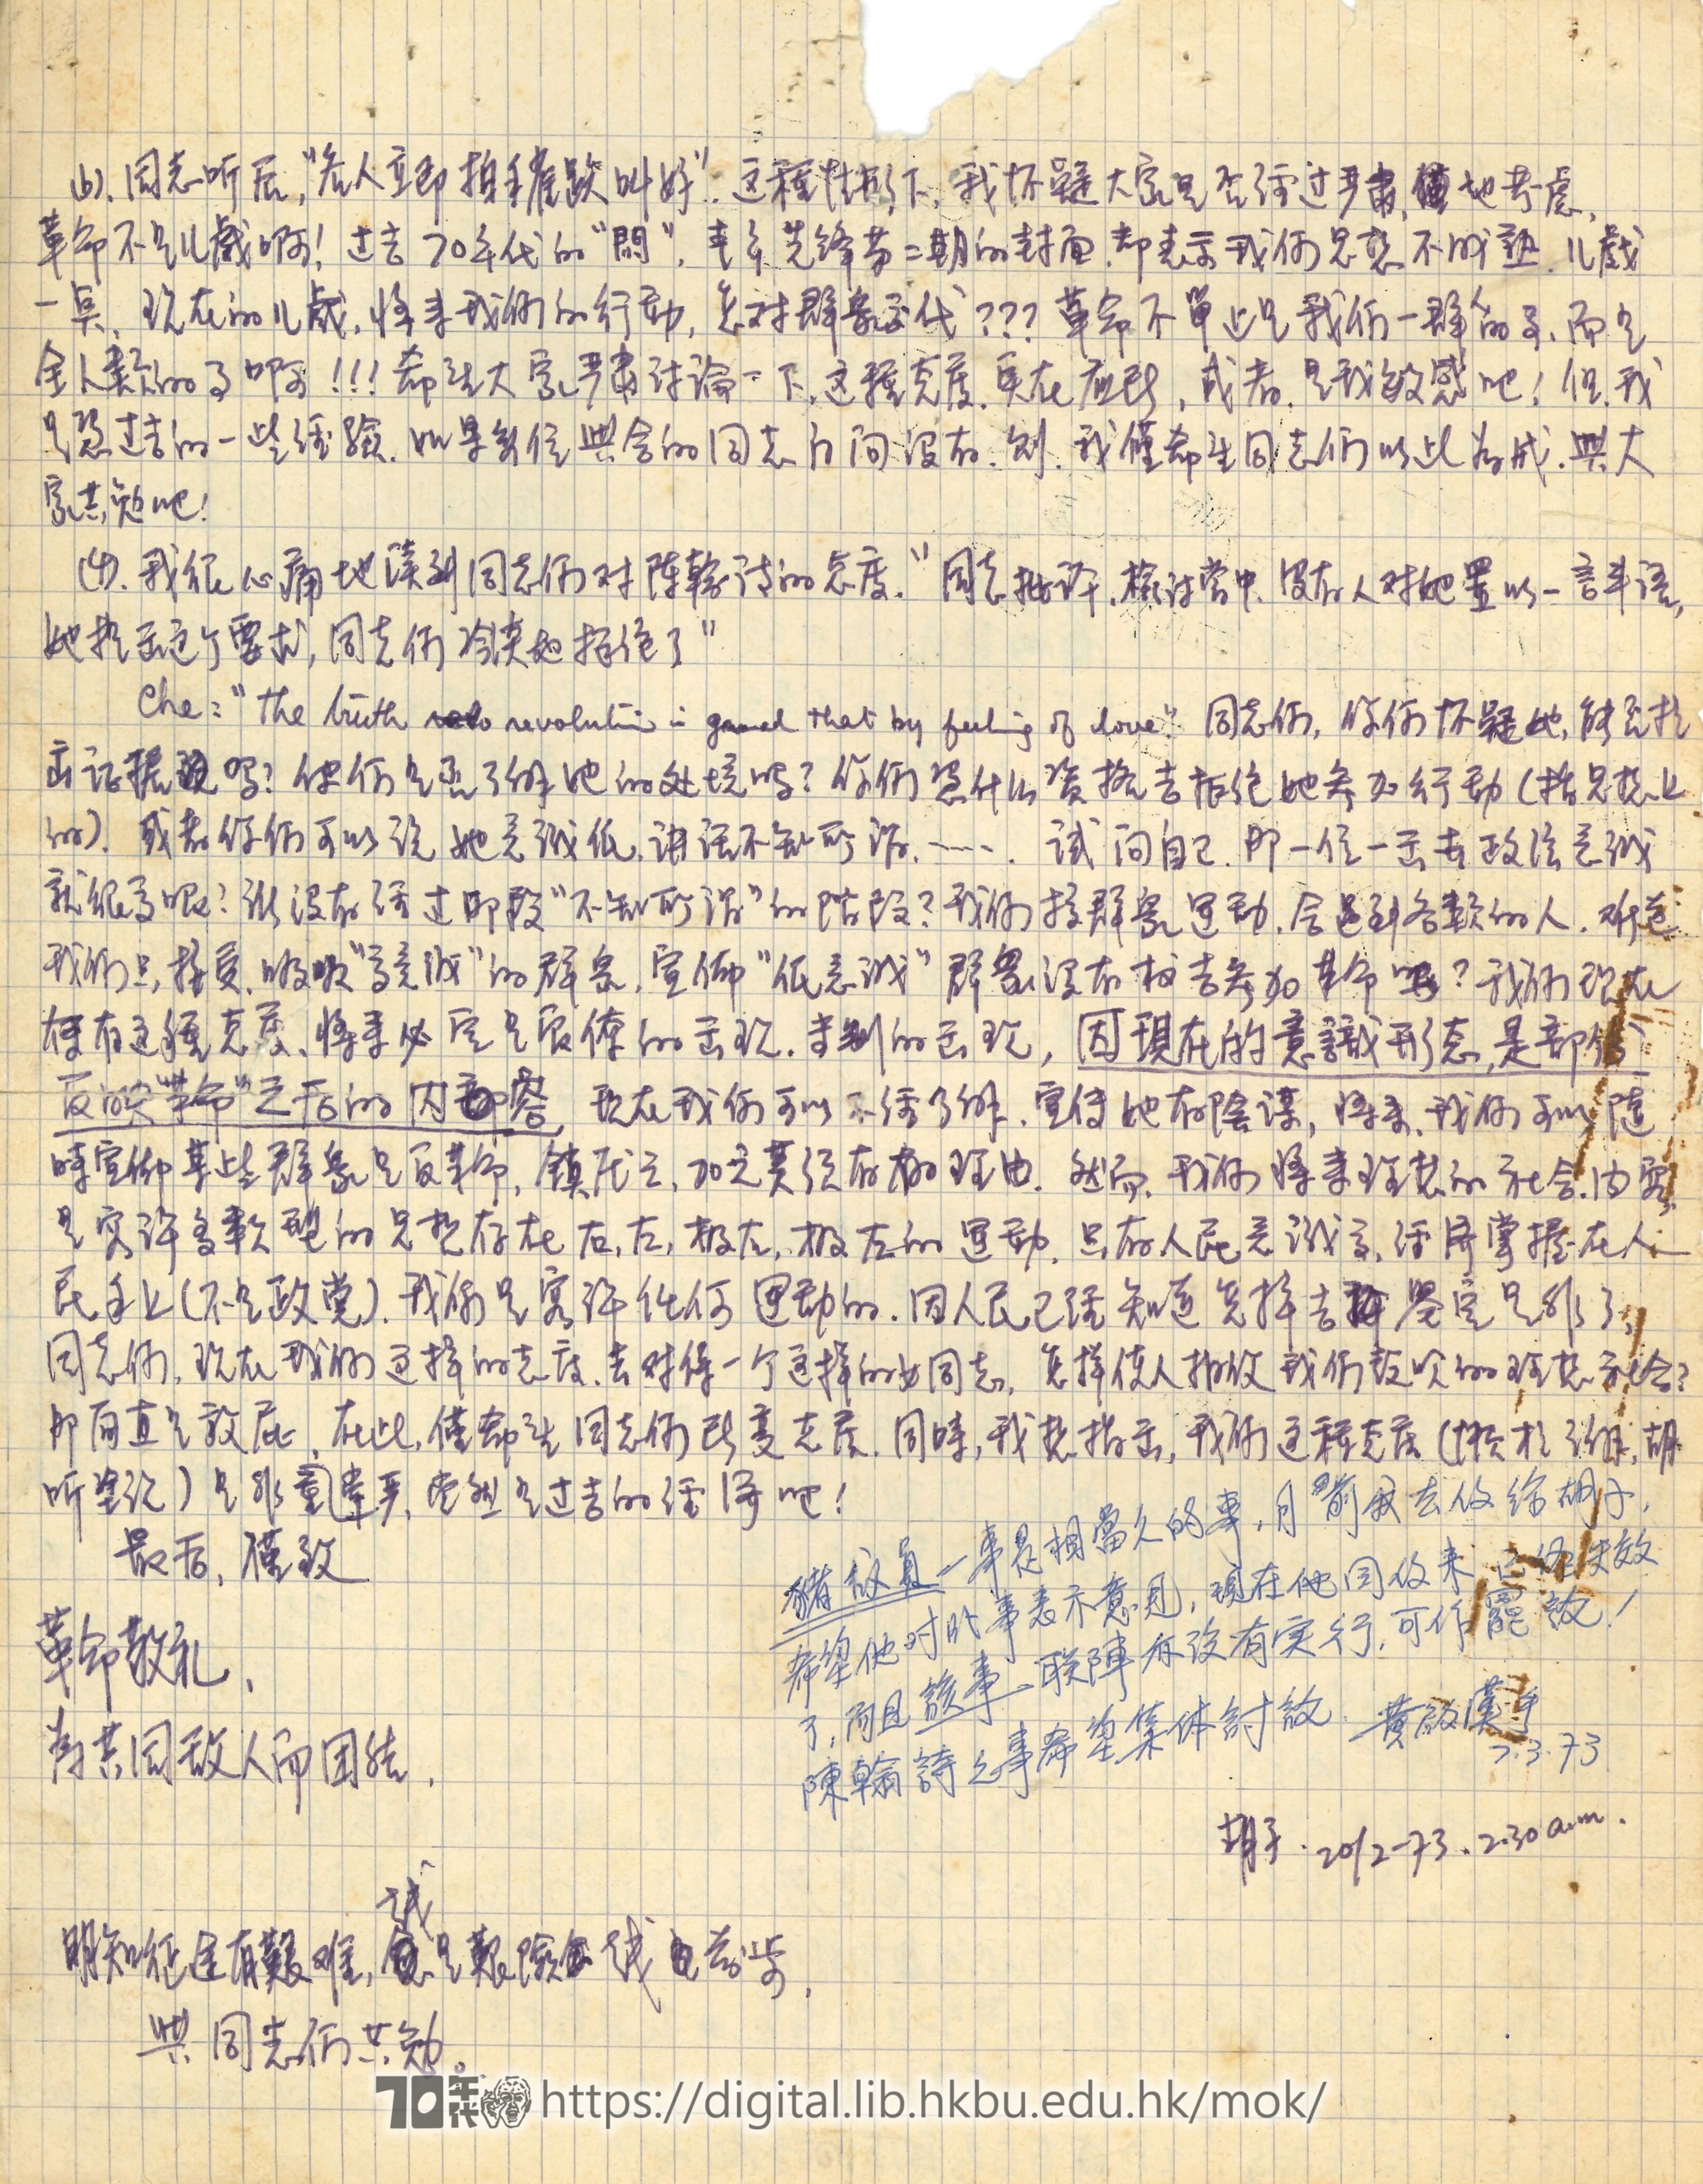   Letter from Wu-chi to friends 胡子 